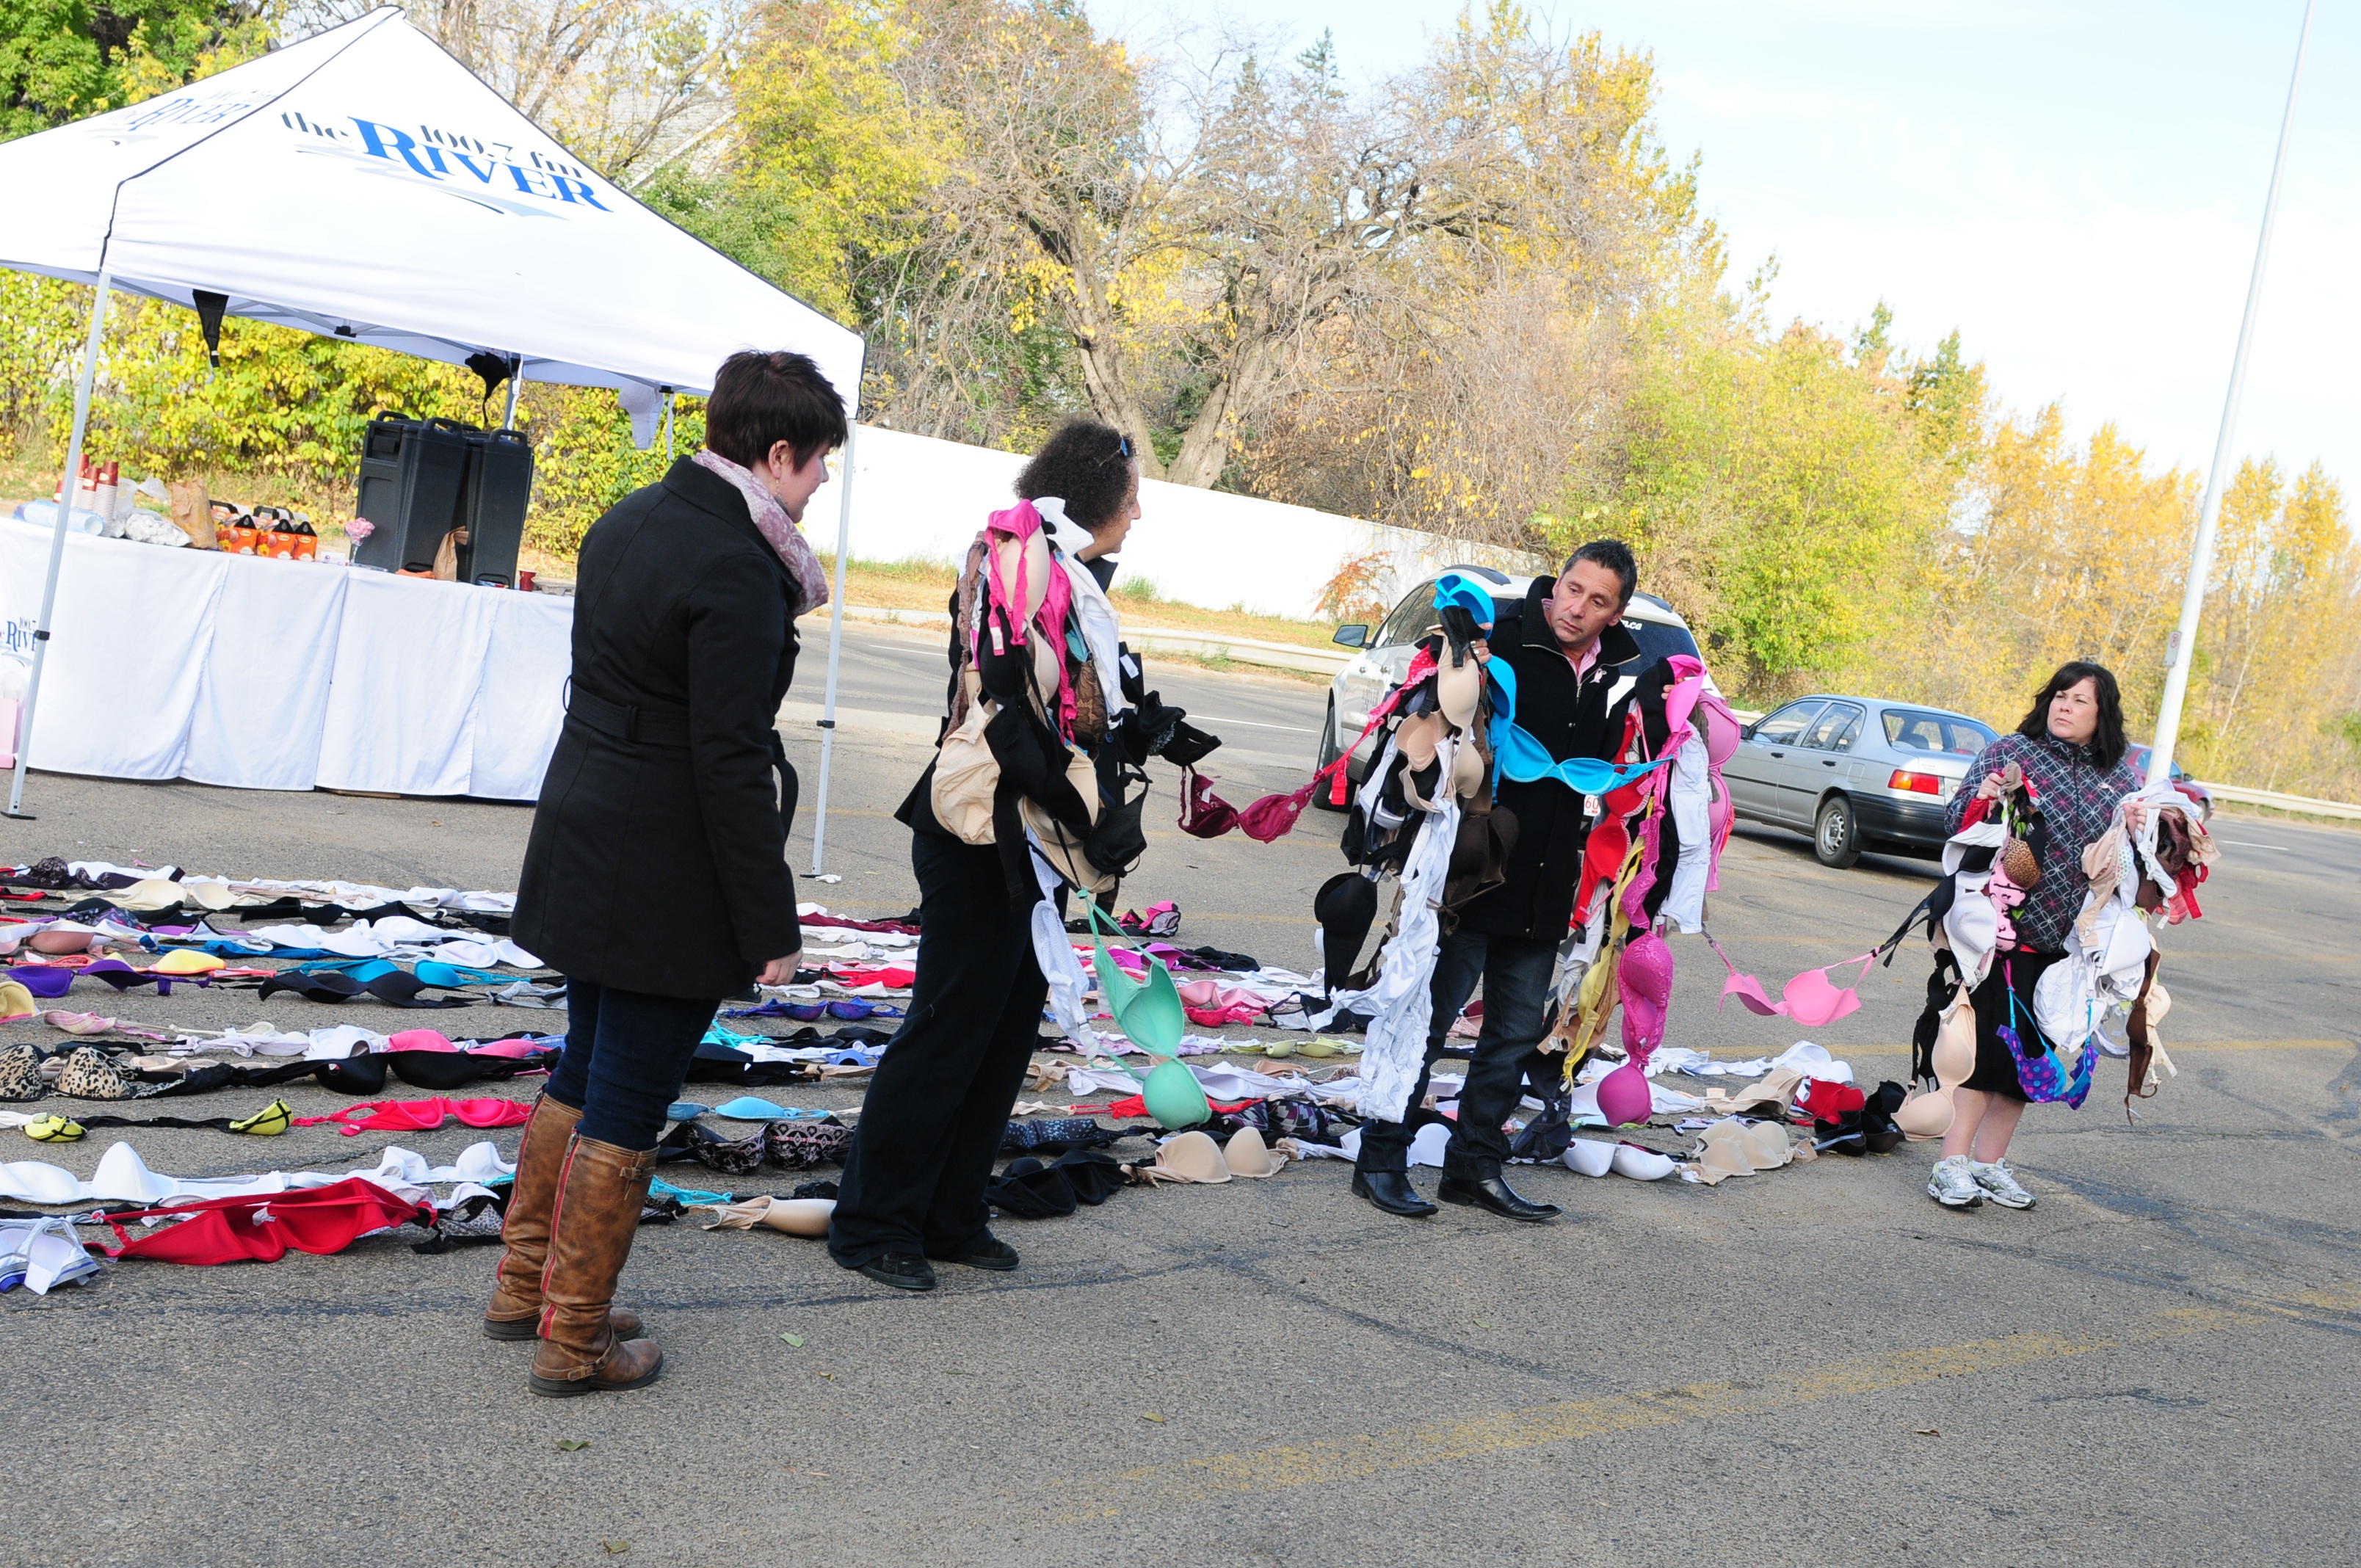 STOCKING UP- Team members from The River radio station get ready to hang donated bras across the Red Deer River in support of breast cancer.